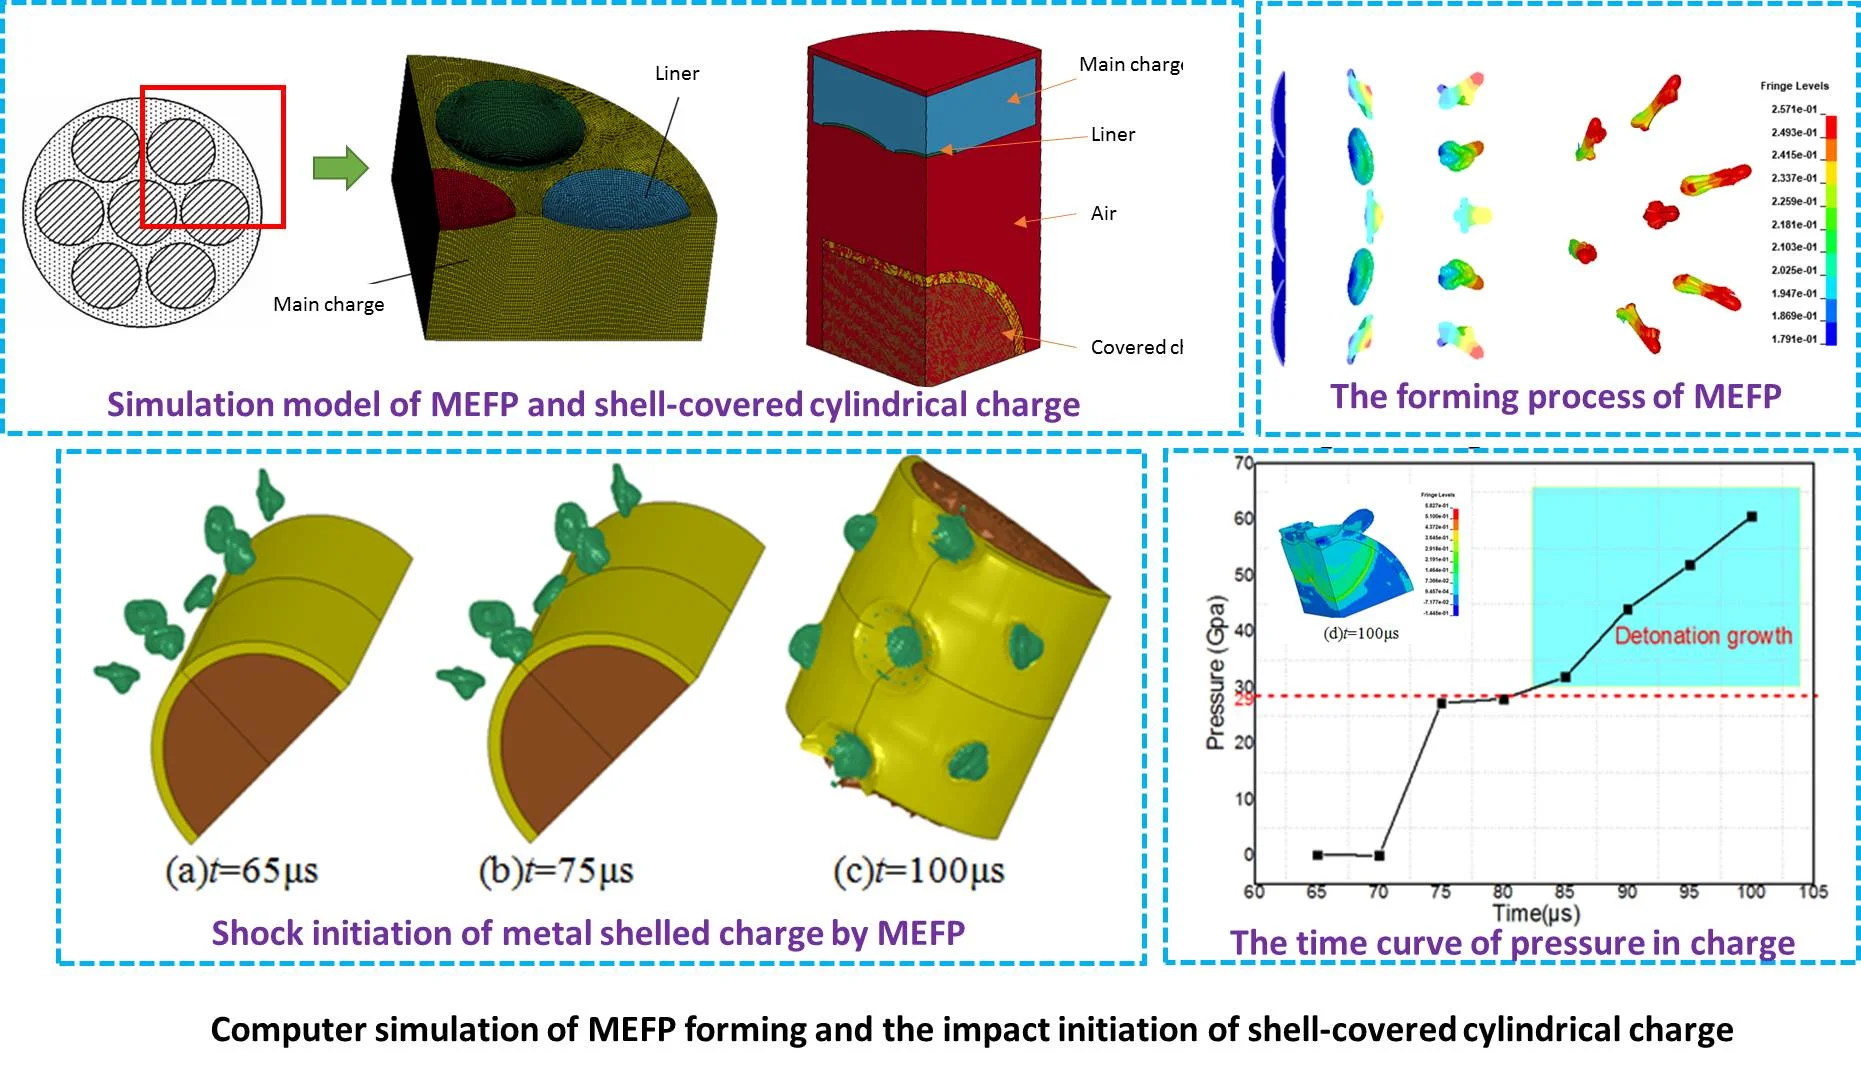 Computer simulation of MEFP forming and the impact initiation of shell-covered cylindrical charge